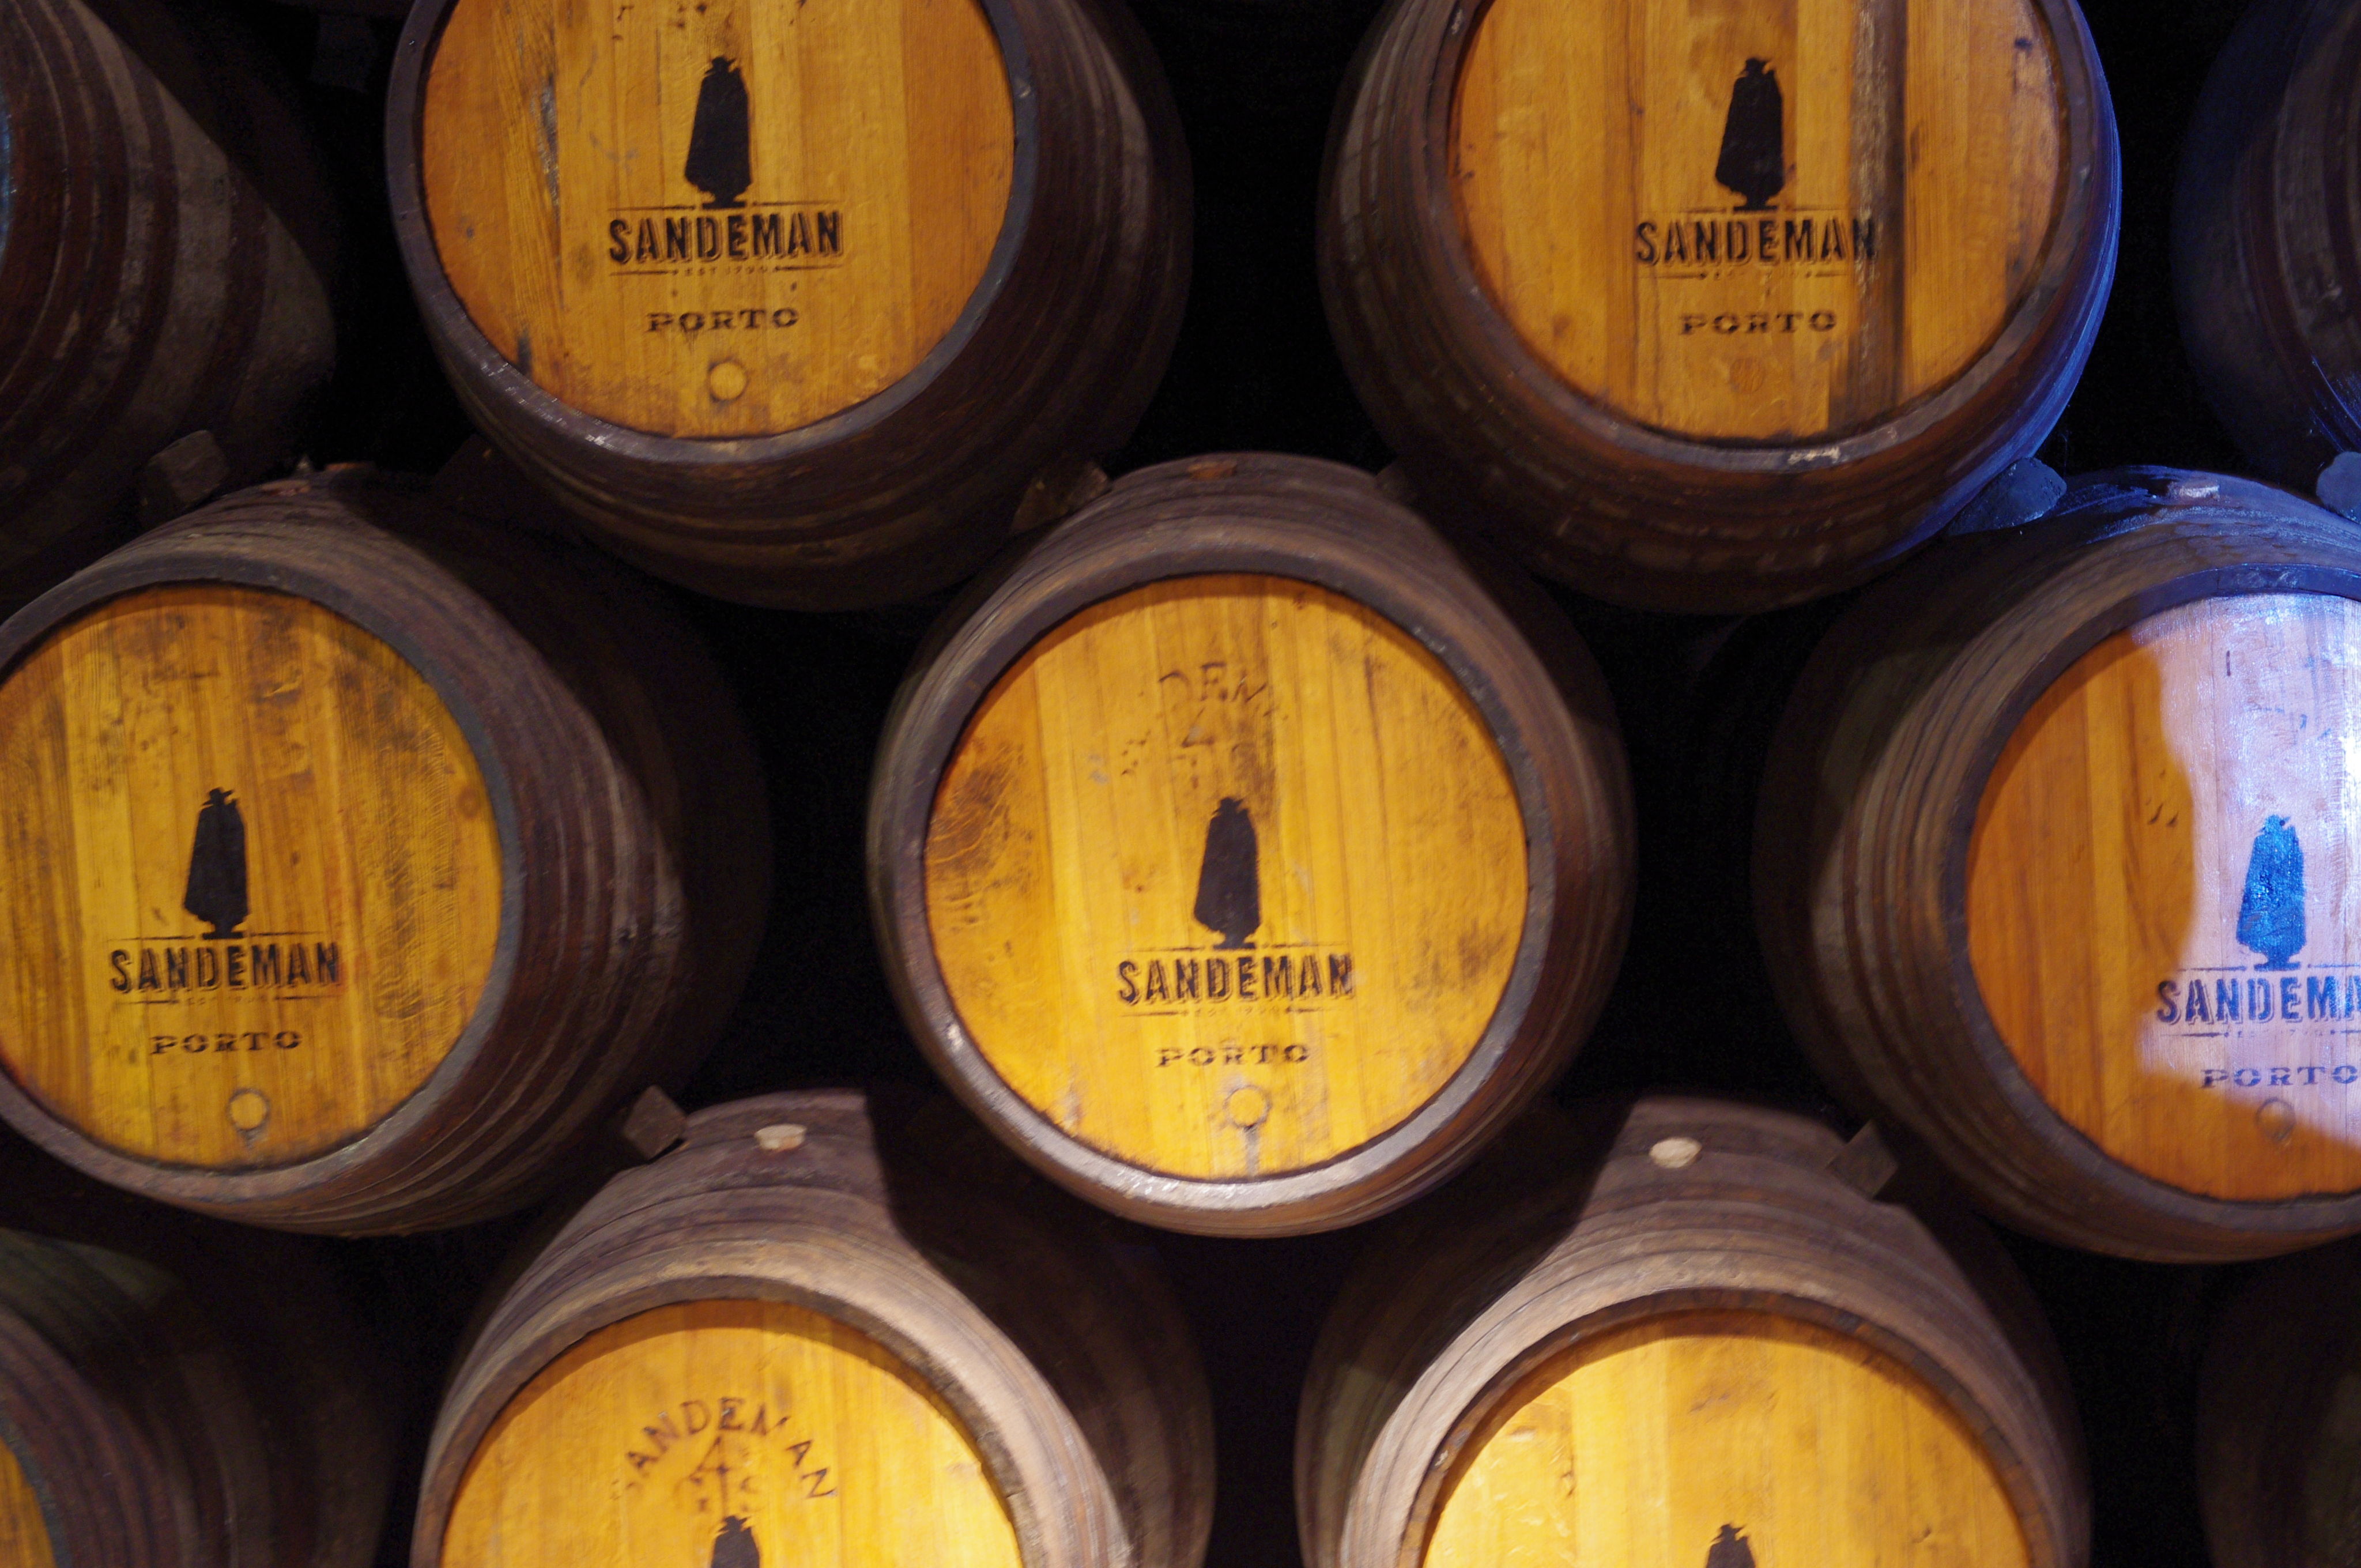 Everything at the Sandeman Port Winery reflects the Sandeman Don logo (CC 2.0 / Kenneth Fairfax)